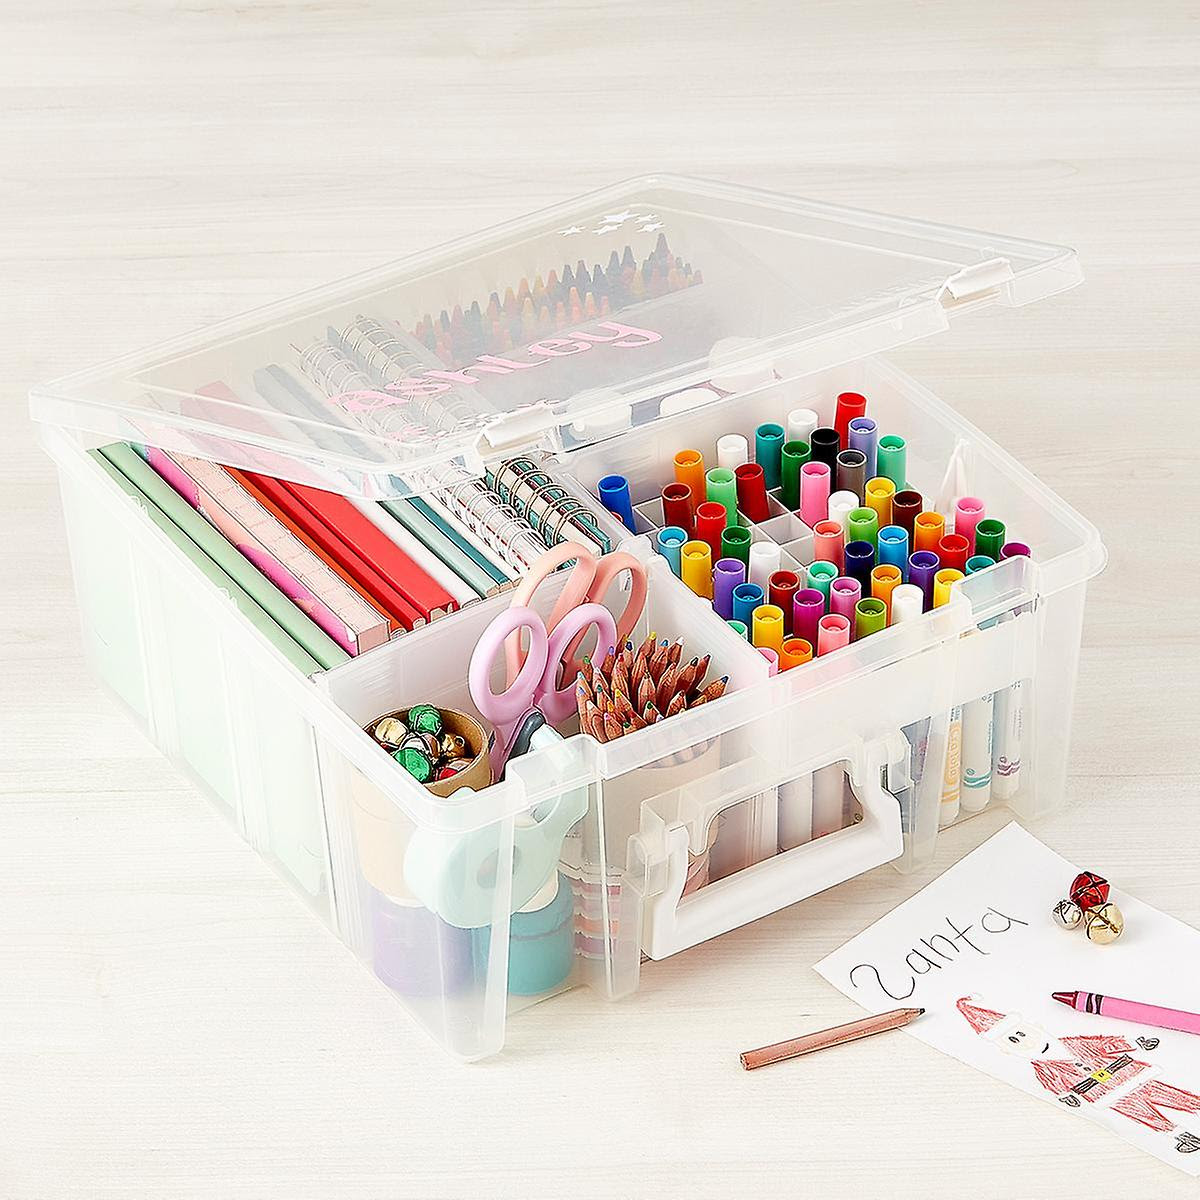 The Art Bin from The Container Store